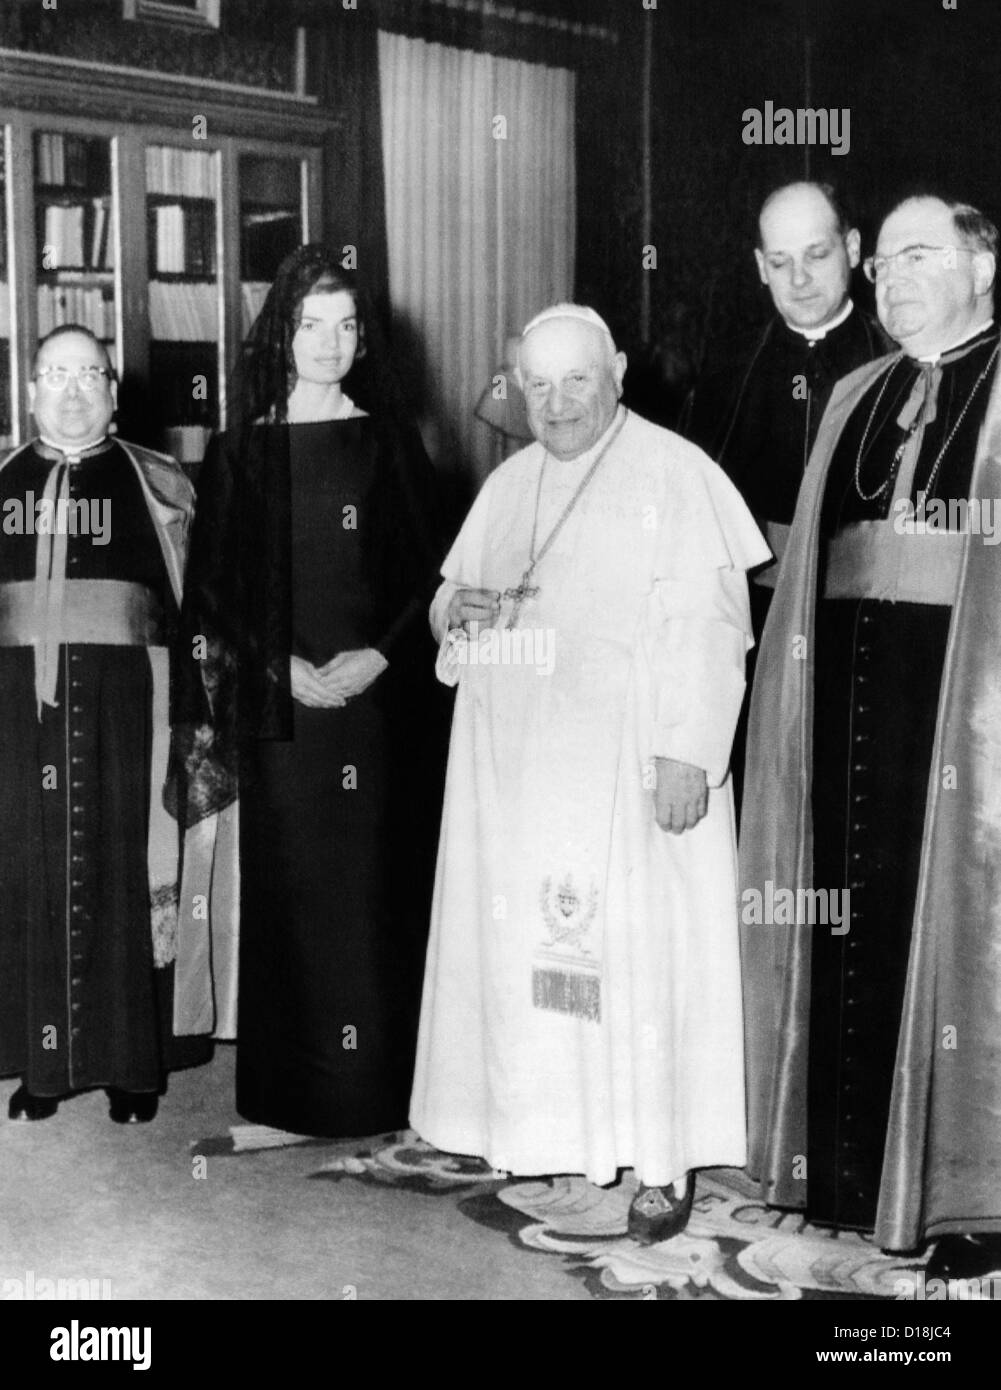 Jacqueline Kennedy in an audience with Pope John XXIII. At left is Msgr. Pius A. Benincasa, and at right, Msgr. Martin J. Stock Photo